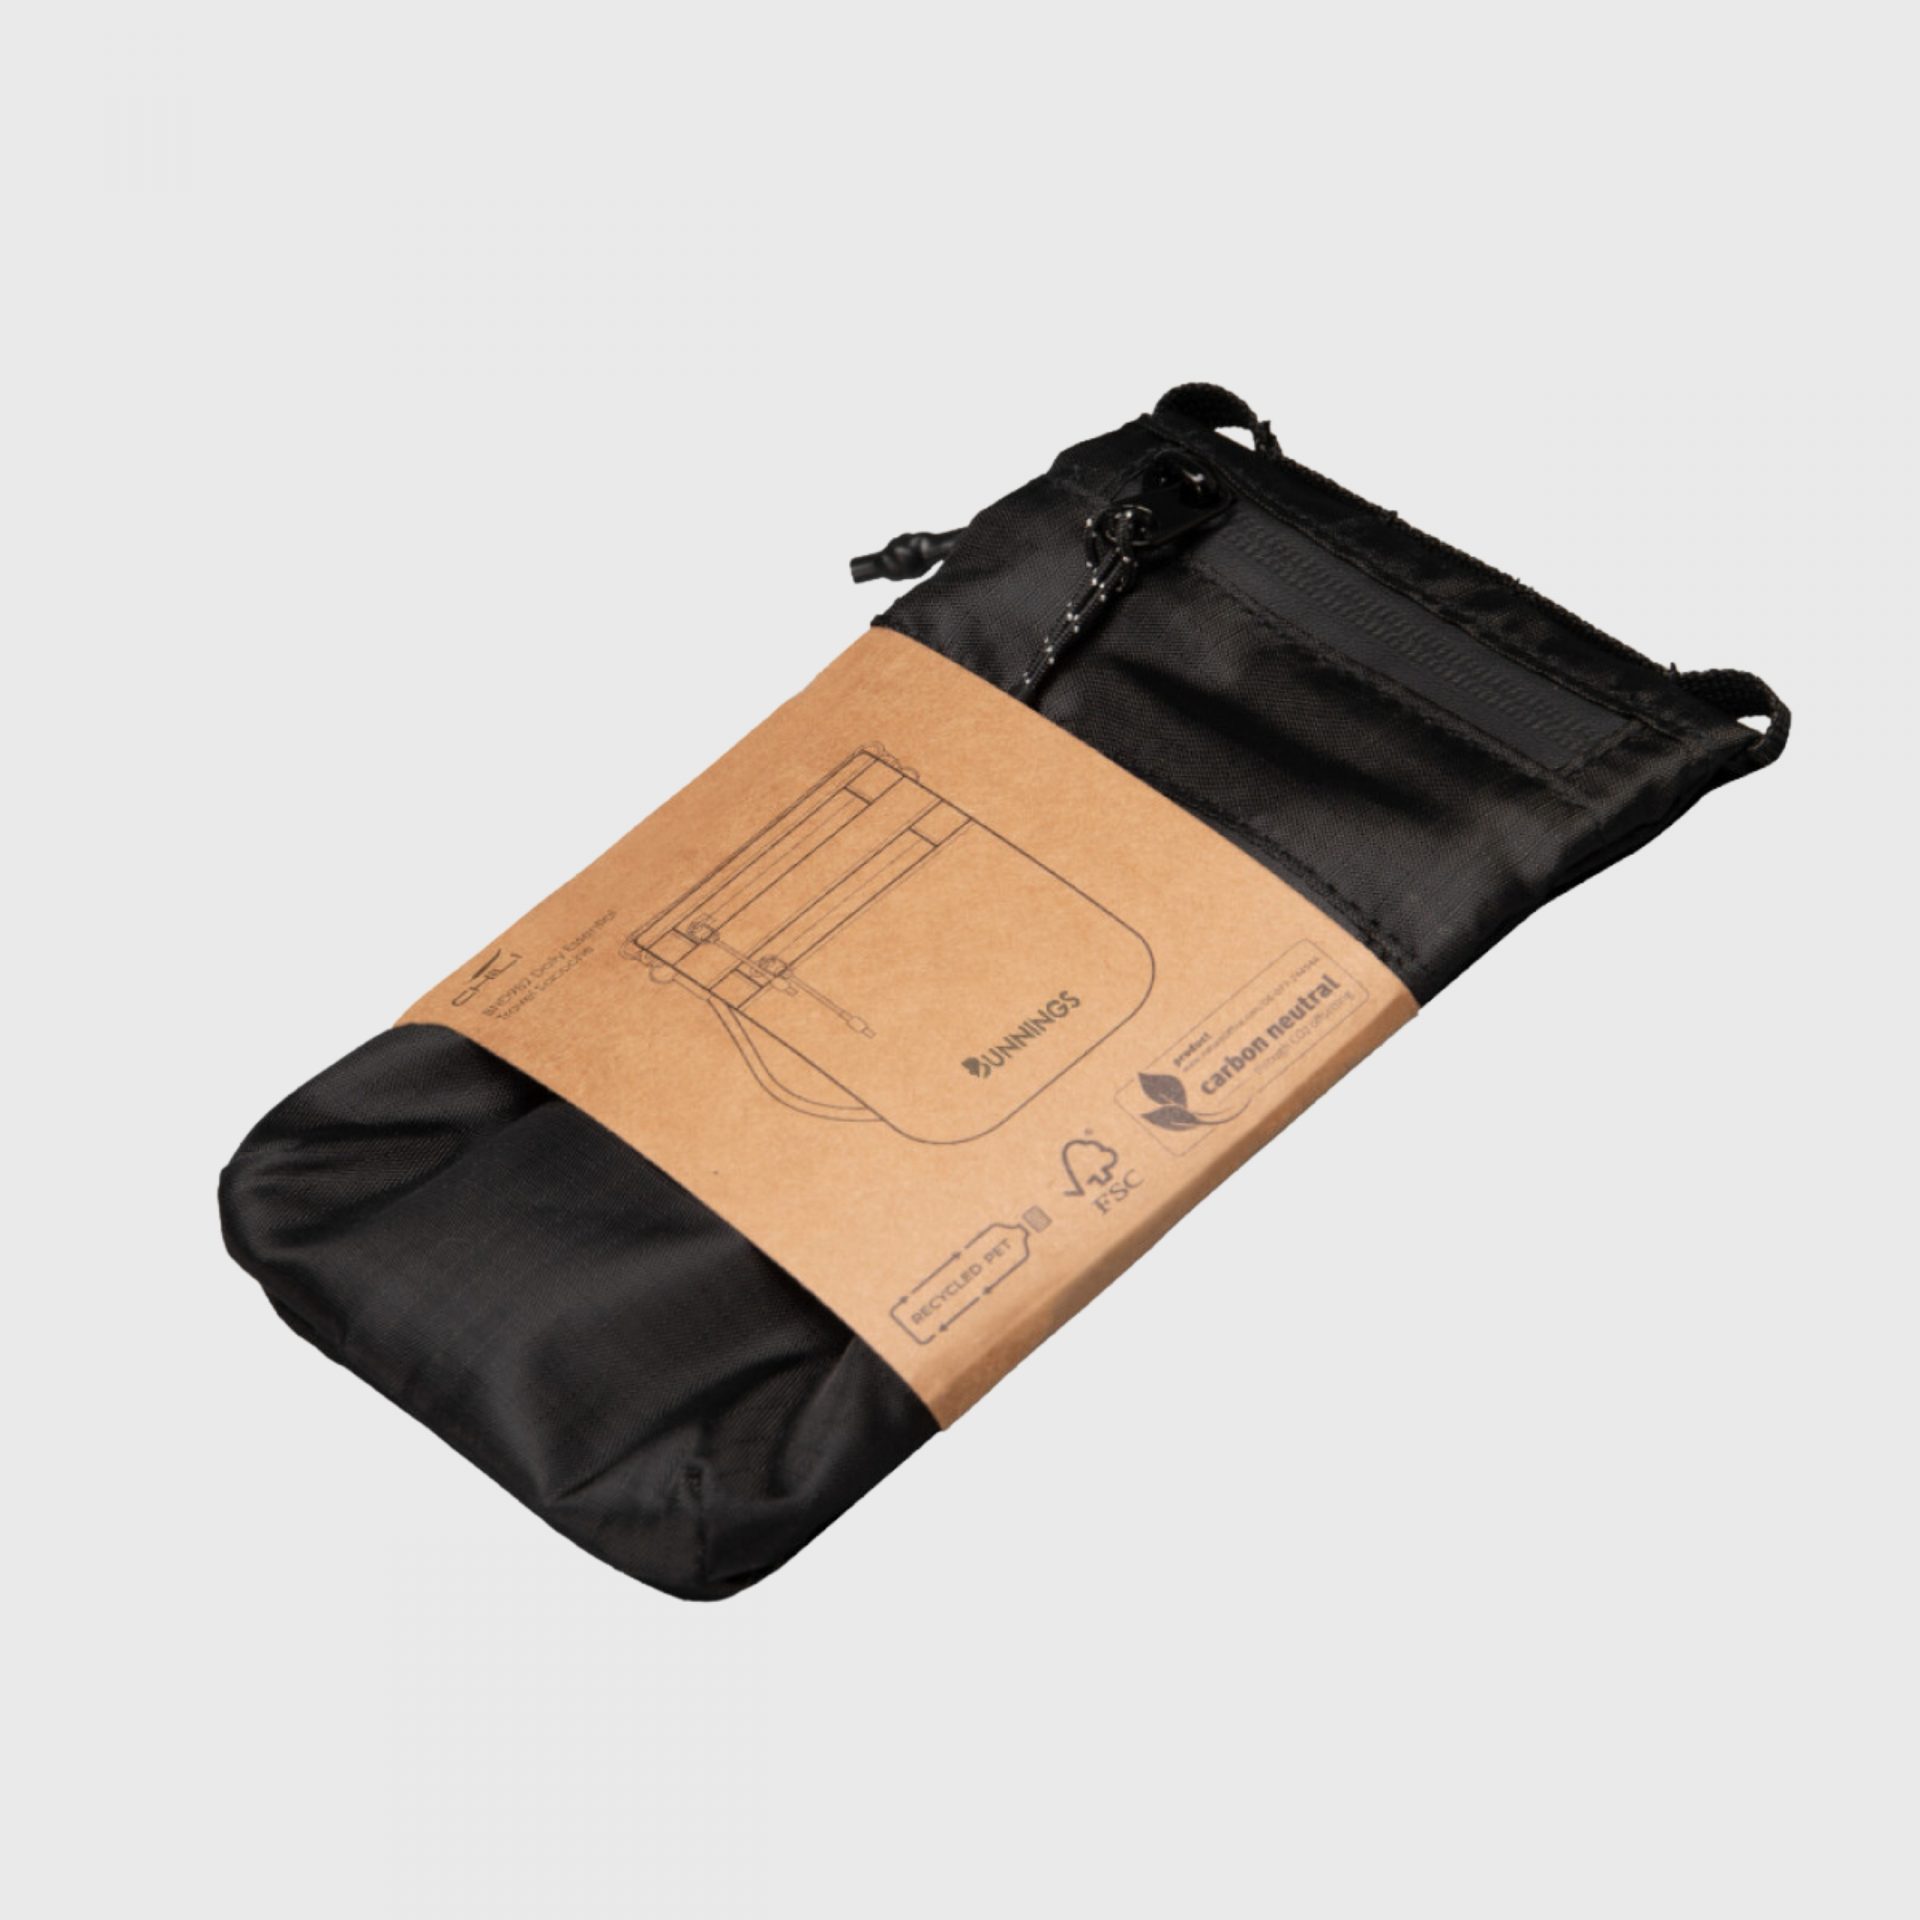 Sustainable Corporate Gifts Singapore Phone Sacoche Pouch Made From Recycled PET Packaging